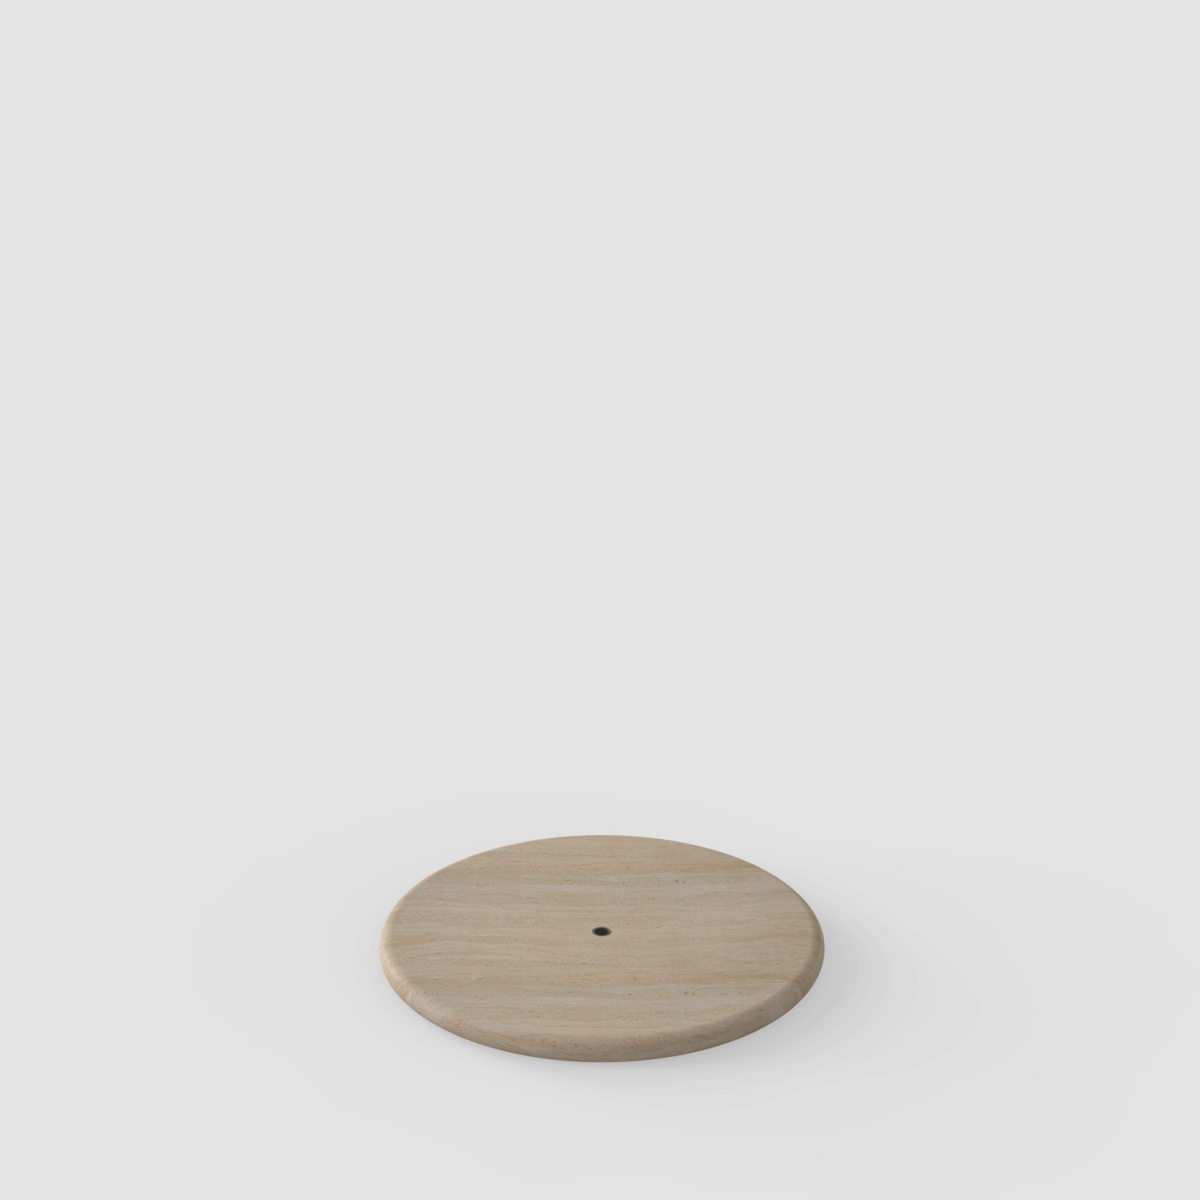 OIXDESIGN PeaPod Side Table, Assembly GIF